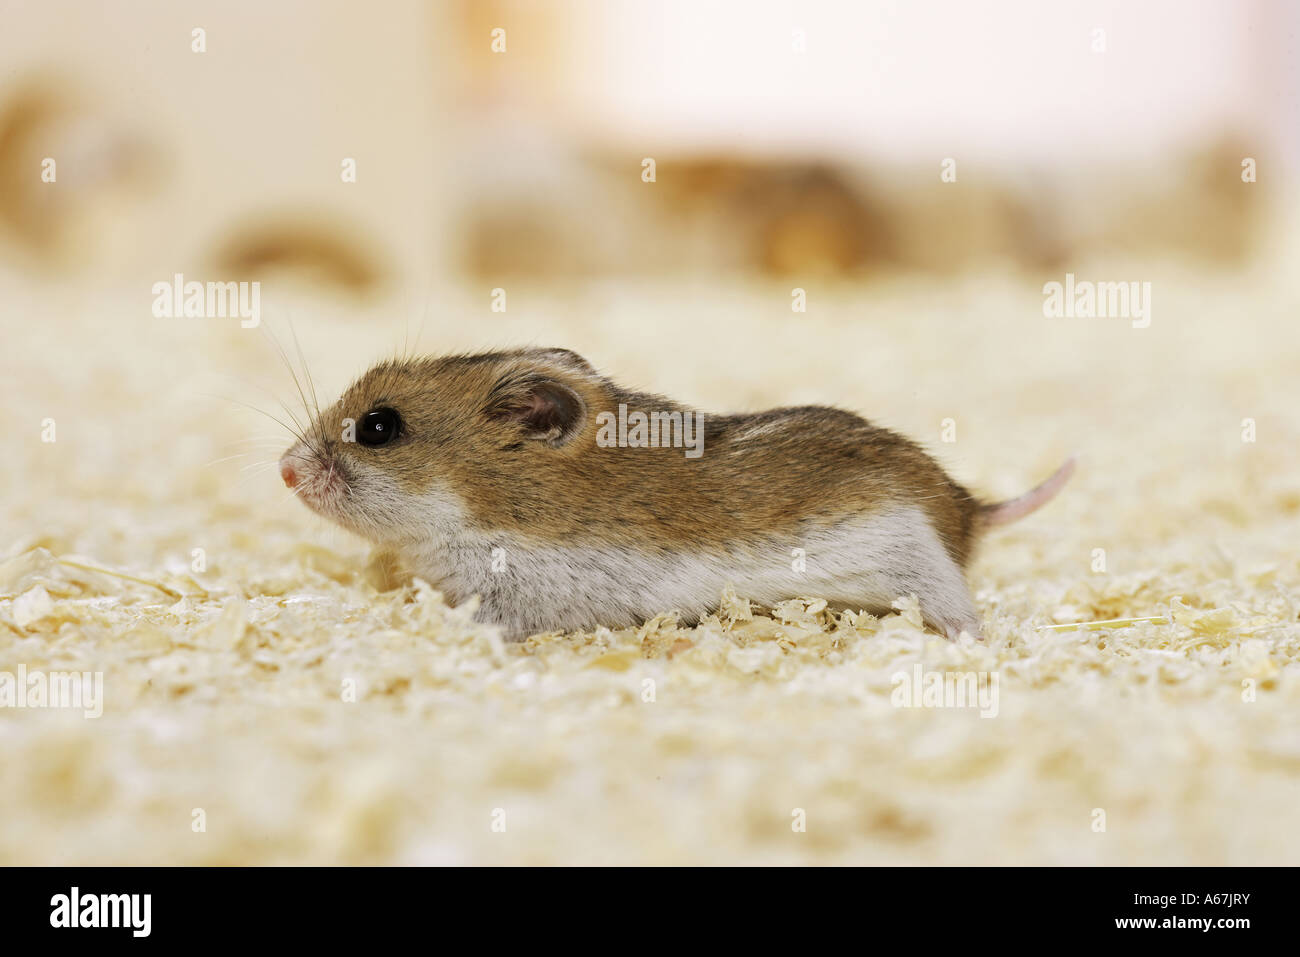 chinese hamster / Cricetulus griseus Stock Photo